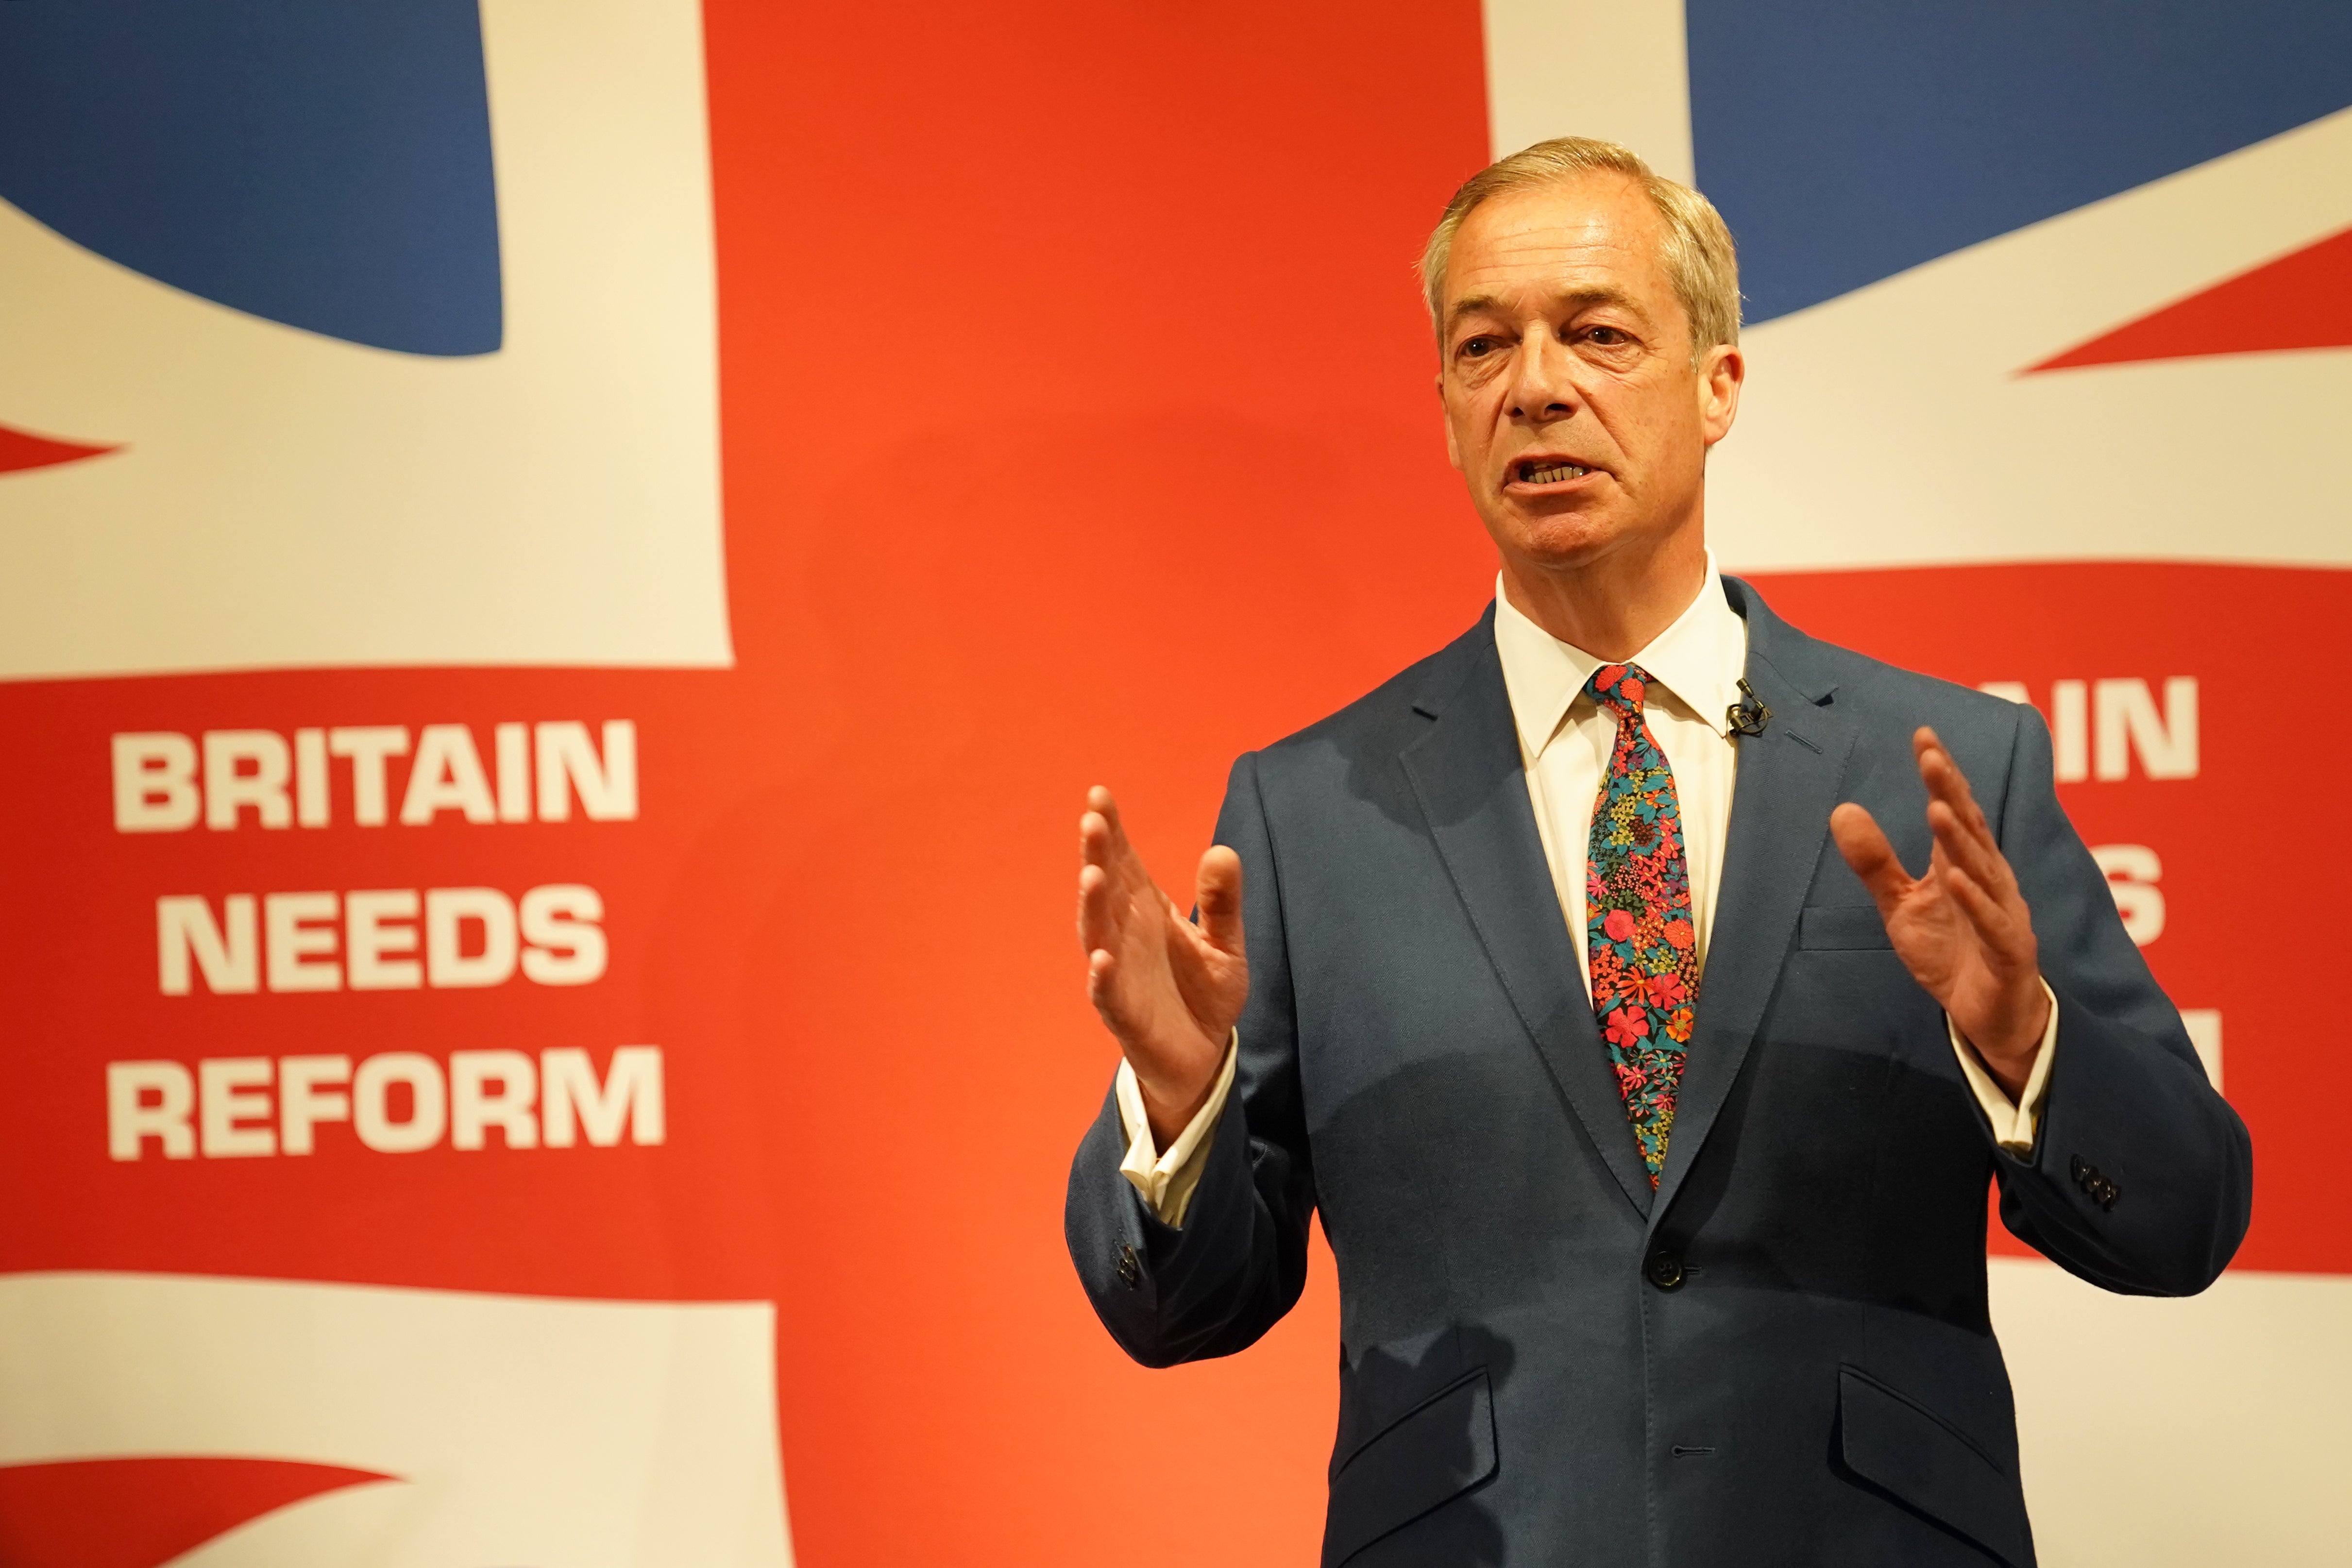 Nigel Farage speaks during a press conference to announce their party's legal immigration policy at The Glaziers Hall in London